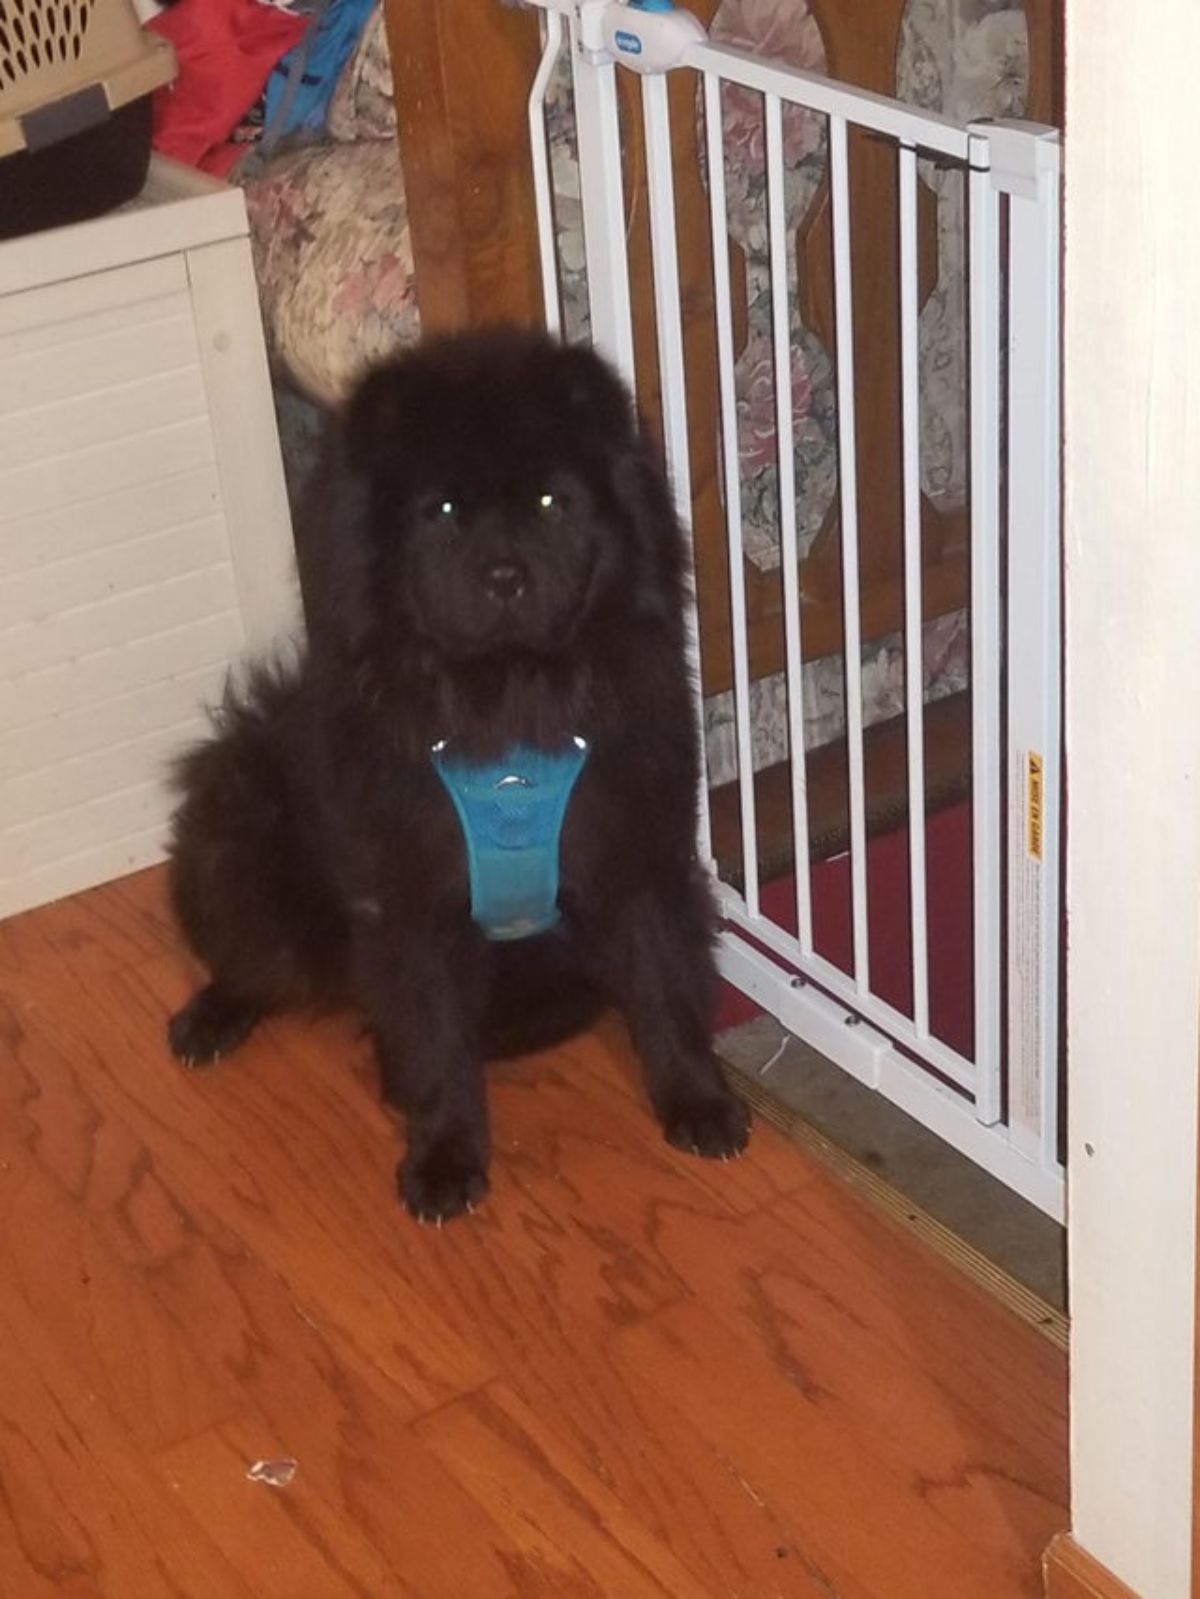 black chow chow puppy wearing a blue harness sitting on a wooden floor next to a puppy gate